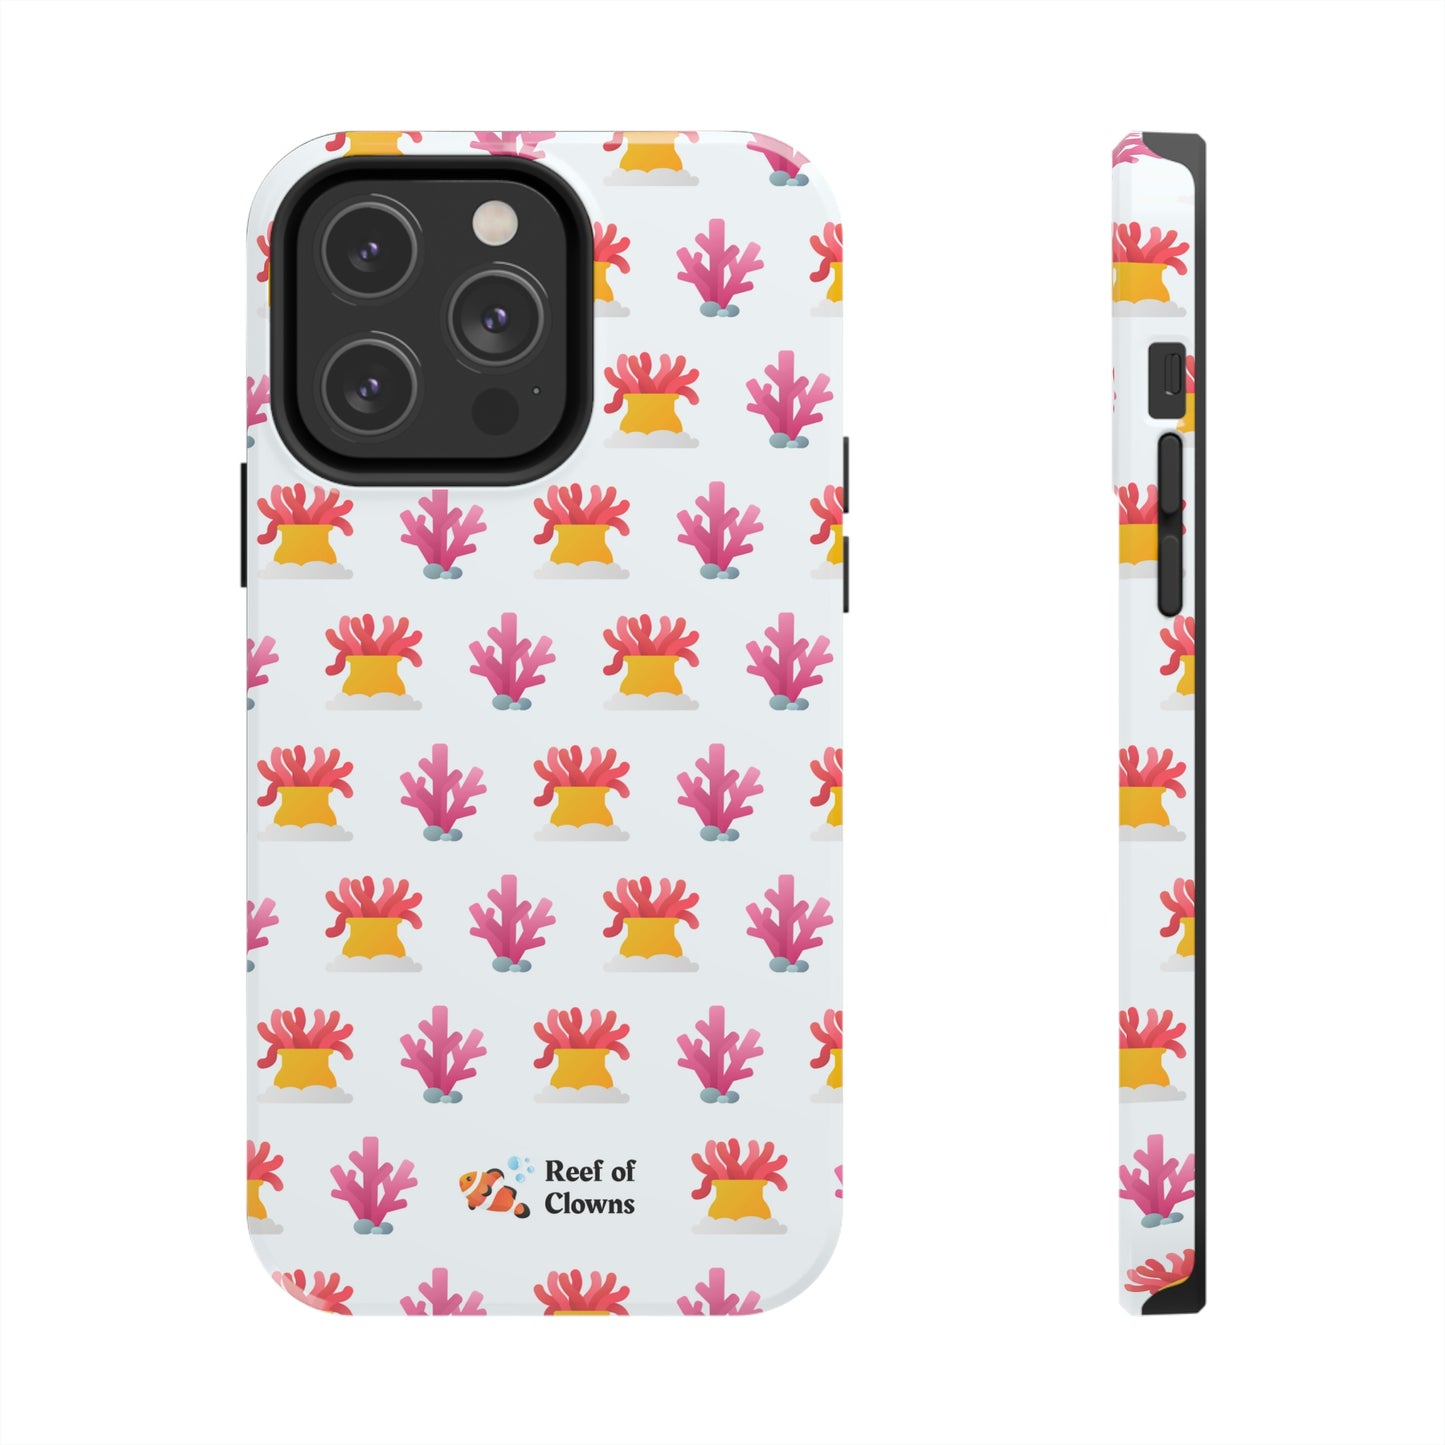 Coral and Anemone Pattern - Reef of Clowns